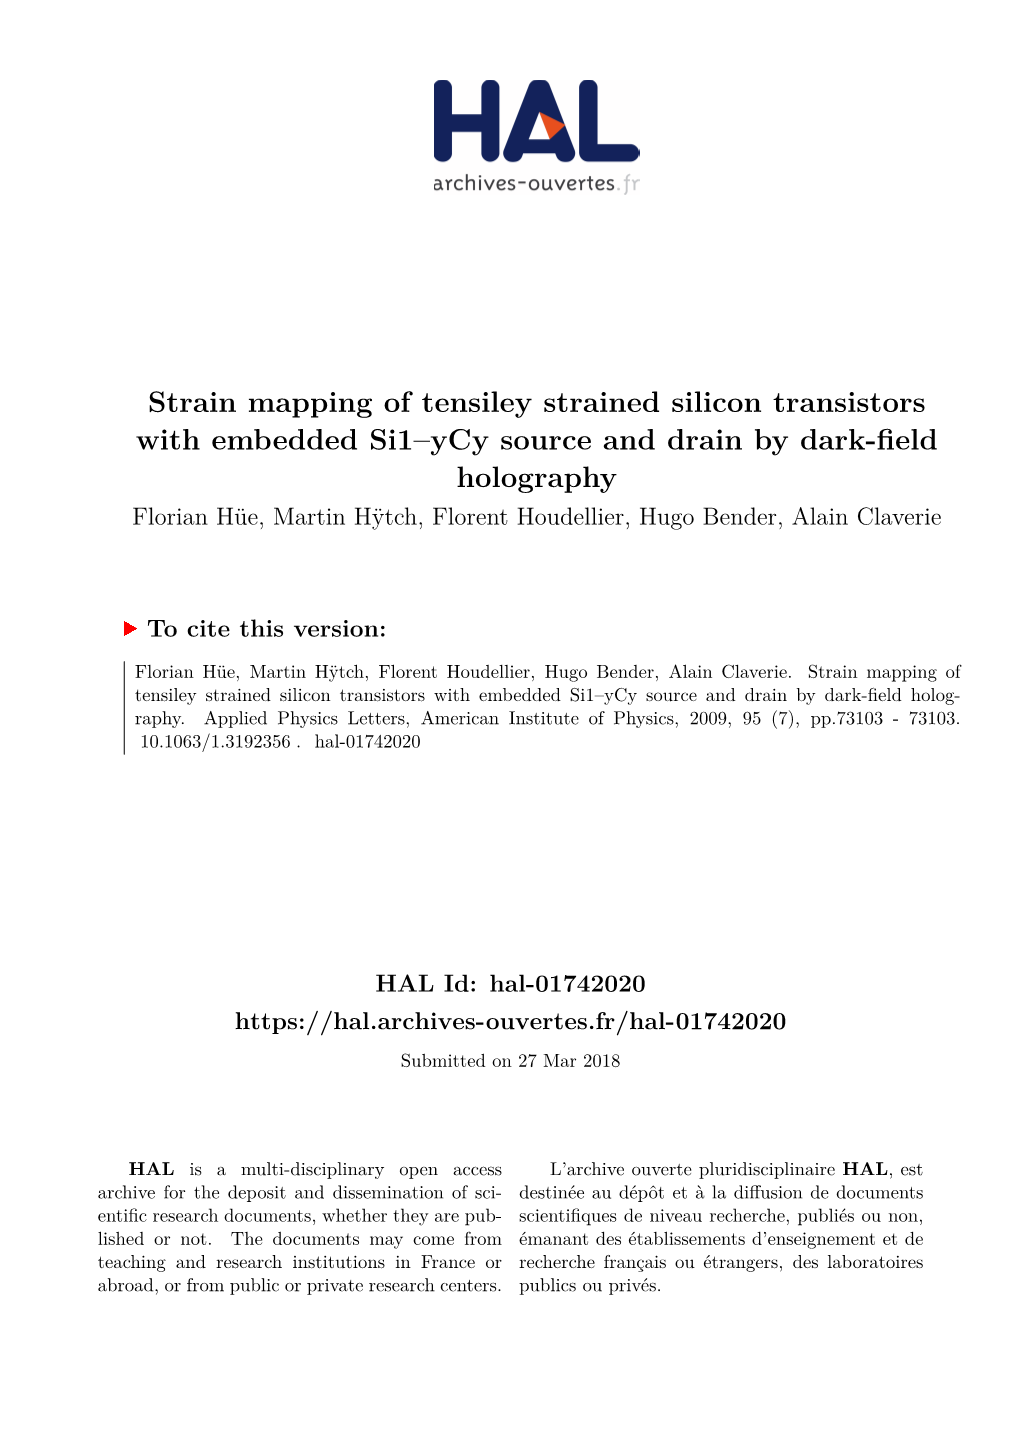 Strain Mapping of Tensiley Strained Silicon Transistors with Embedded